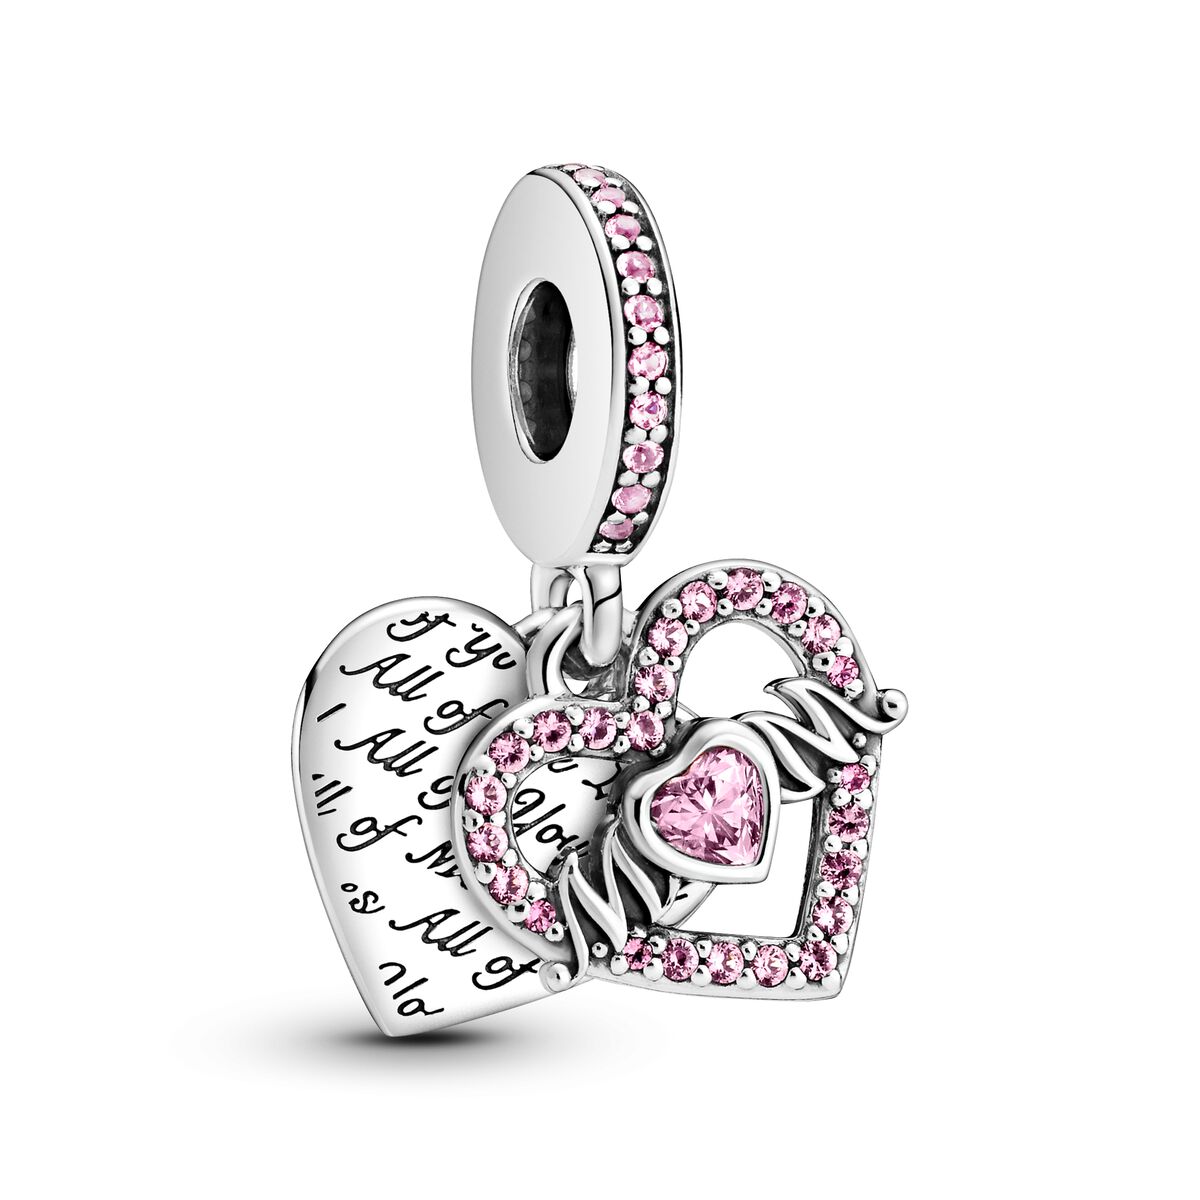 Pandora Charm Pendente Amore Per Mamma - Argento Sterling 925 / Rosa product